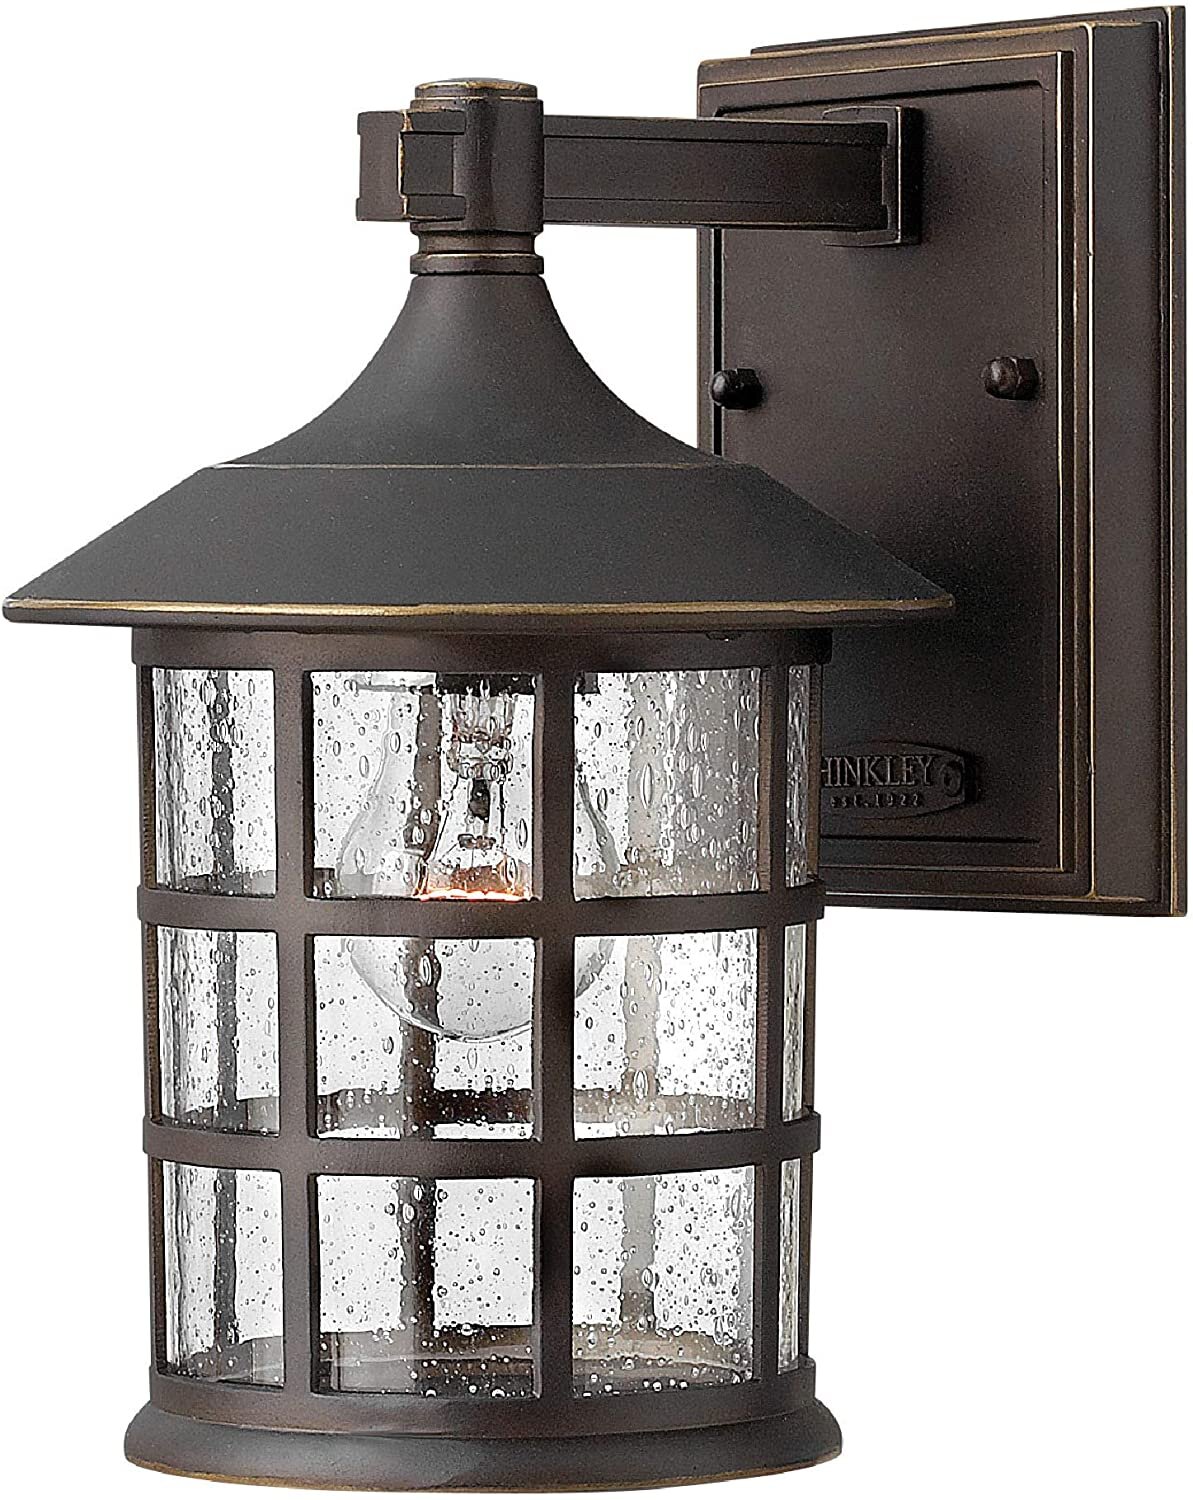 Oil Rubbed Bronze Outdoor Sconce